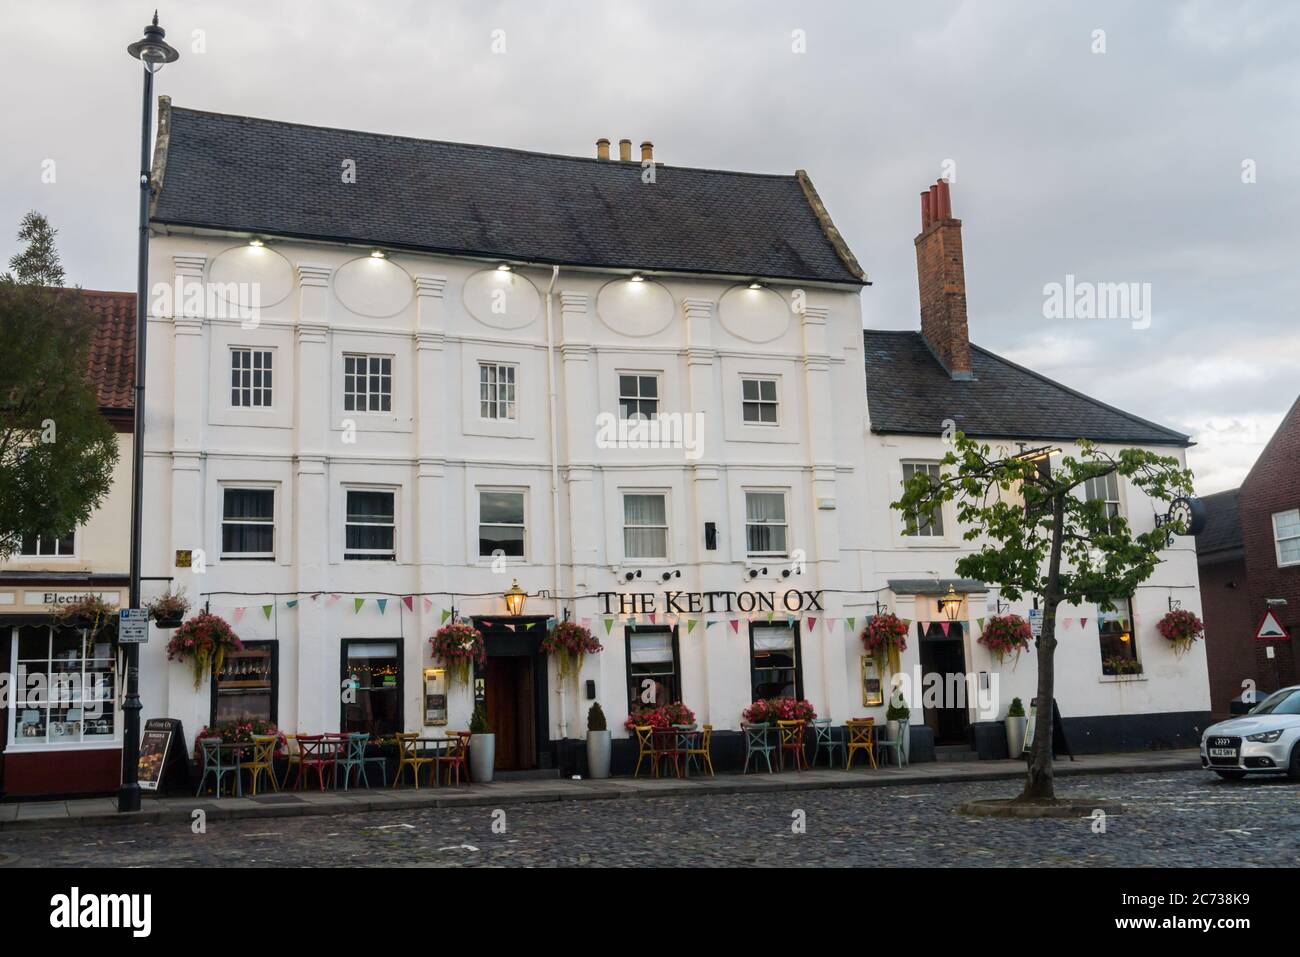 The Ketton Ox Public House in Yarm, North Yorkshire Stock Photo